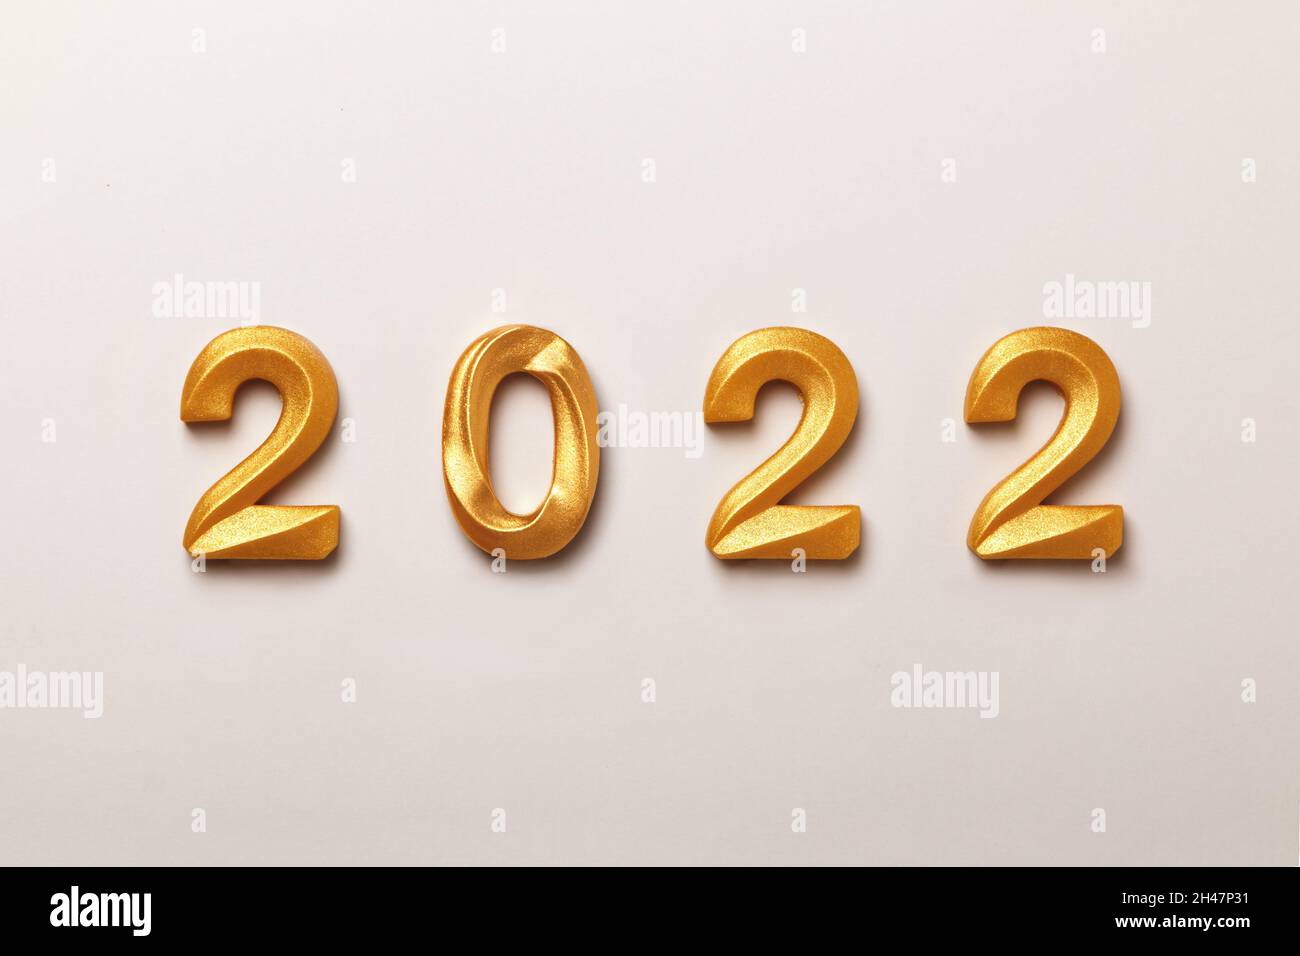 New Year composition with the inscription 2022 gold-colored numbers on a white background. Stock Photo